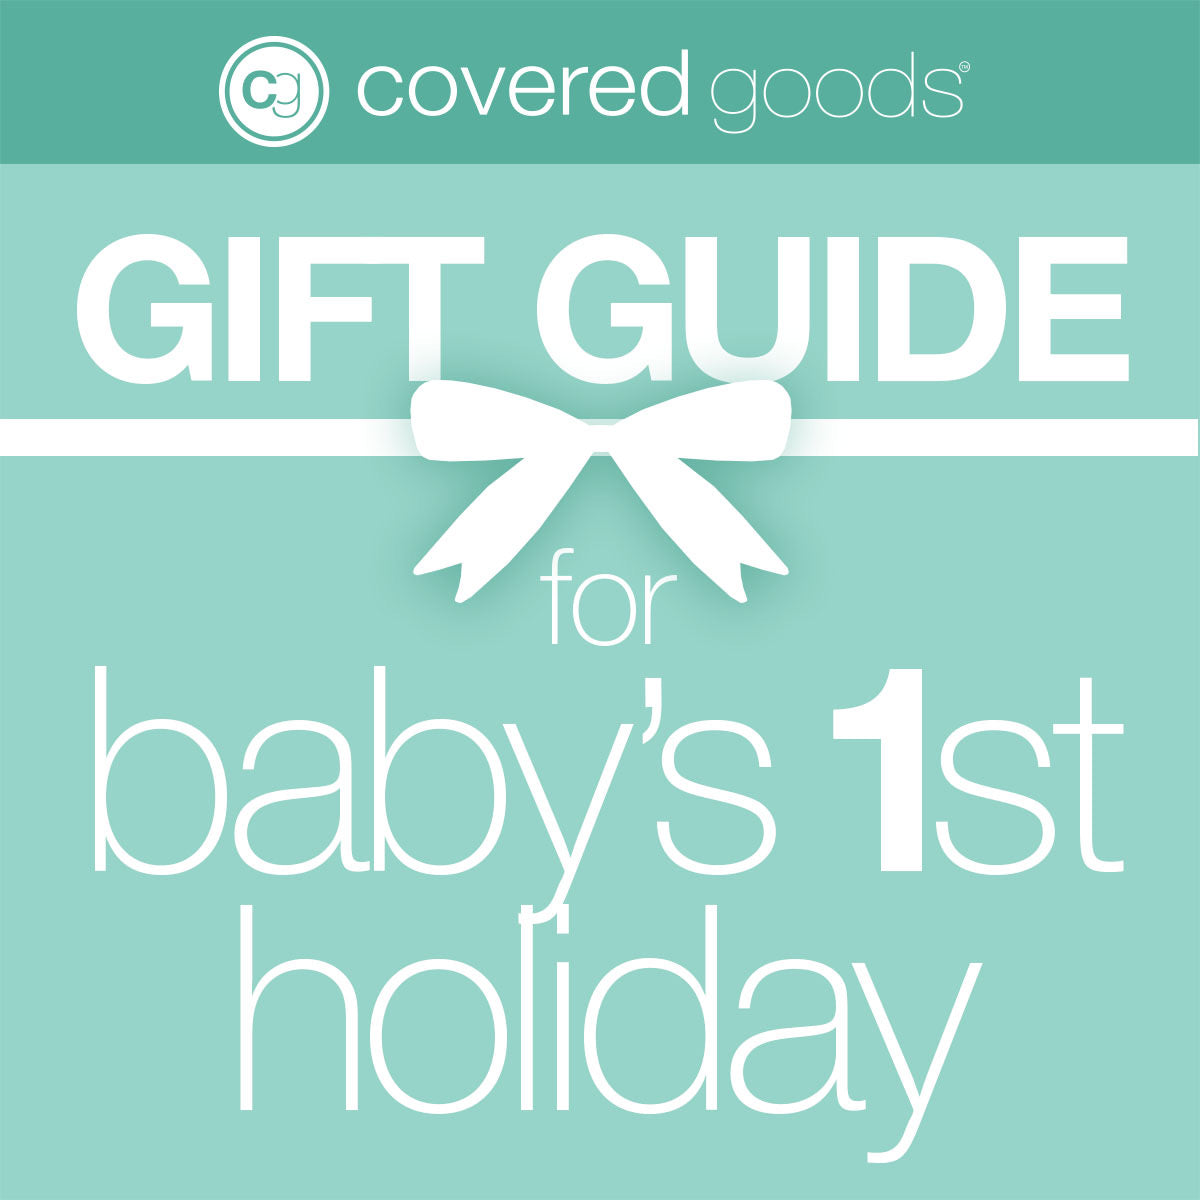 Covered Goods® Gift Guide for Baby's First Holiday